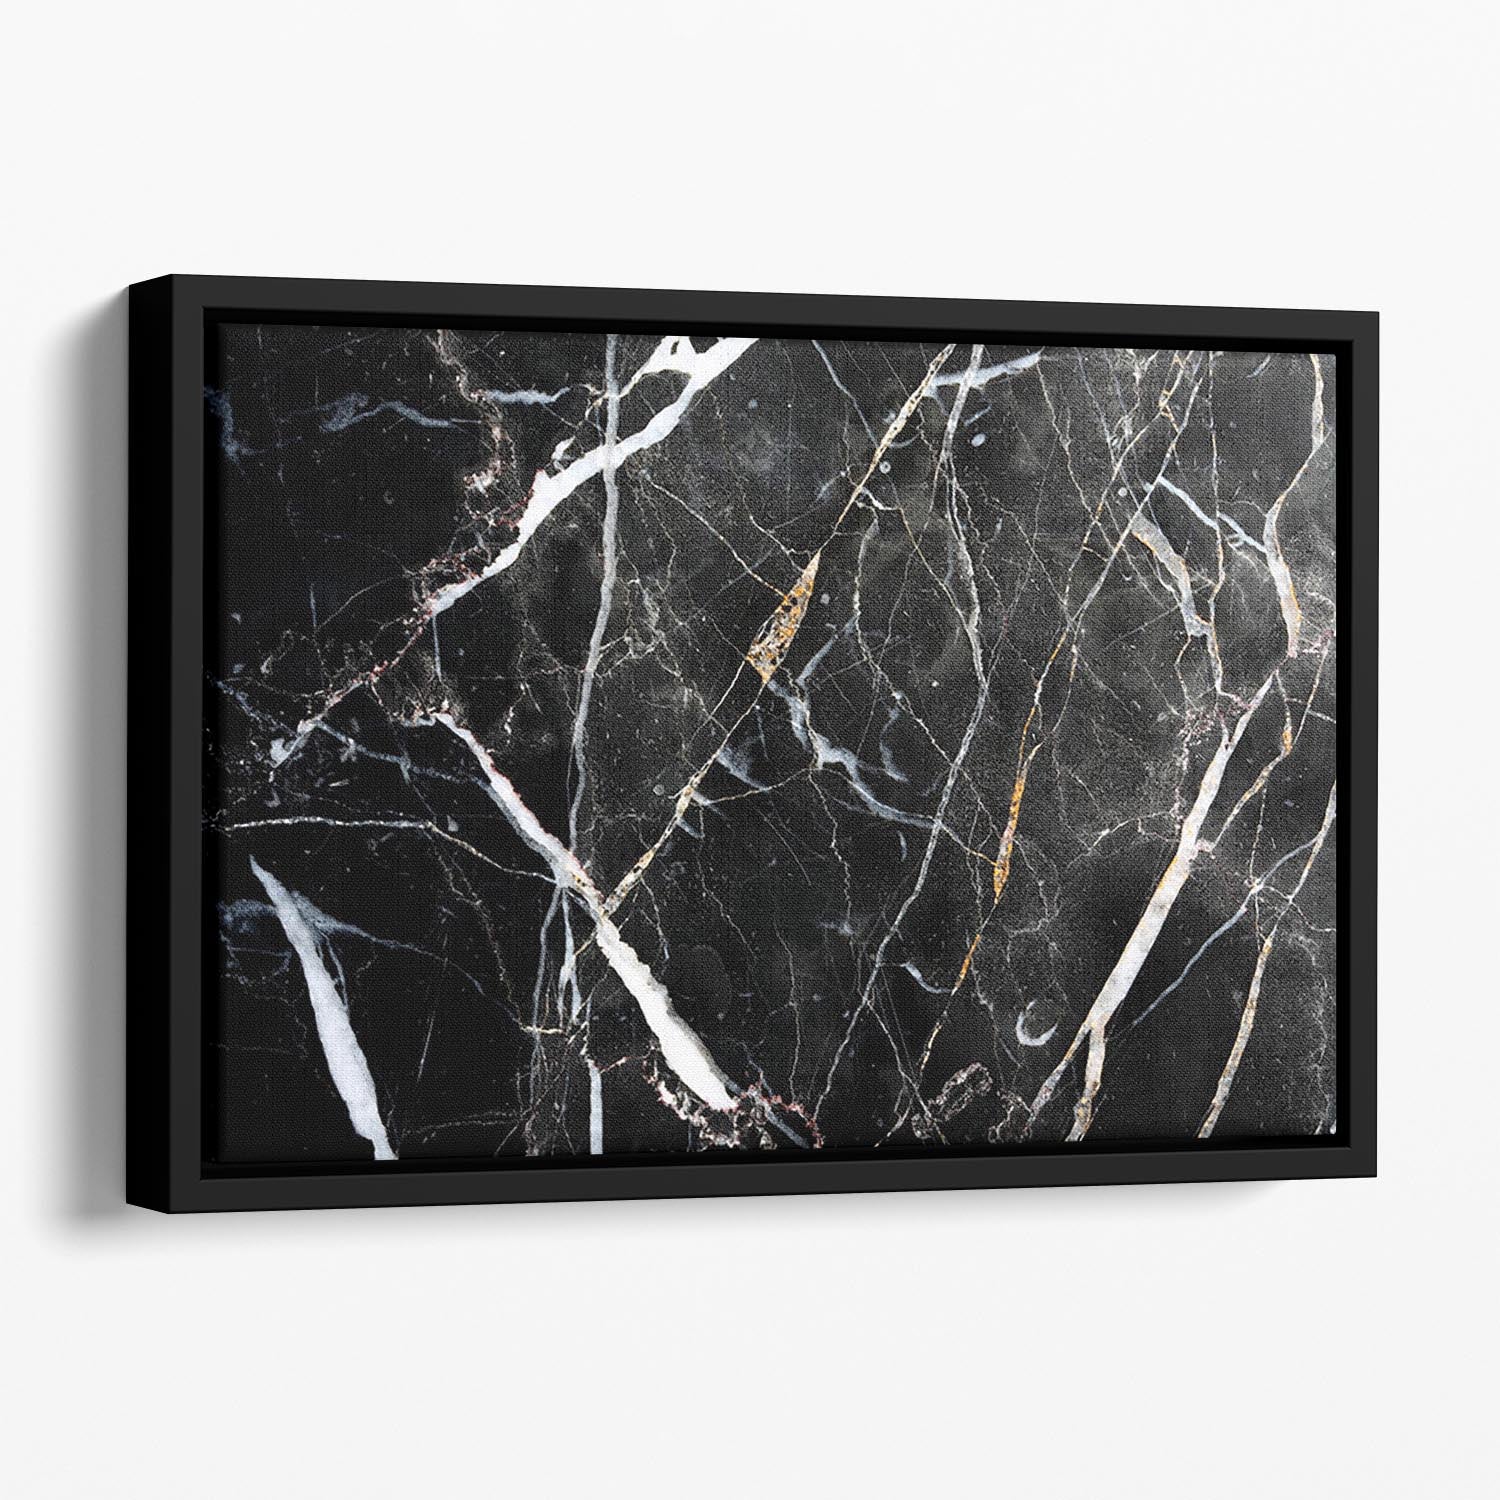 Black White and Gold Cracked Marble Floating Framed Canvas - Canvas Art Rocks - 1